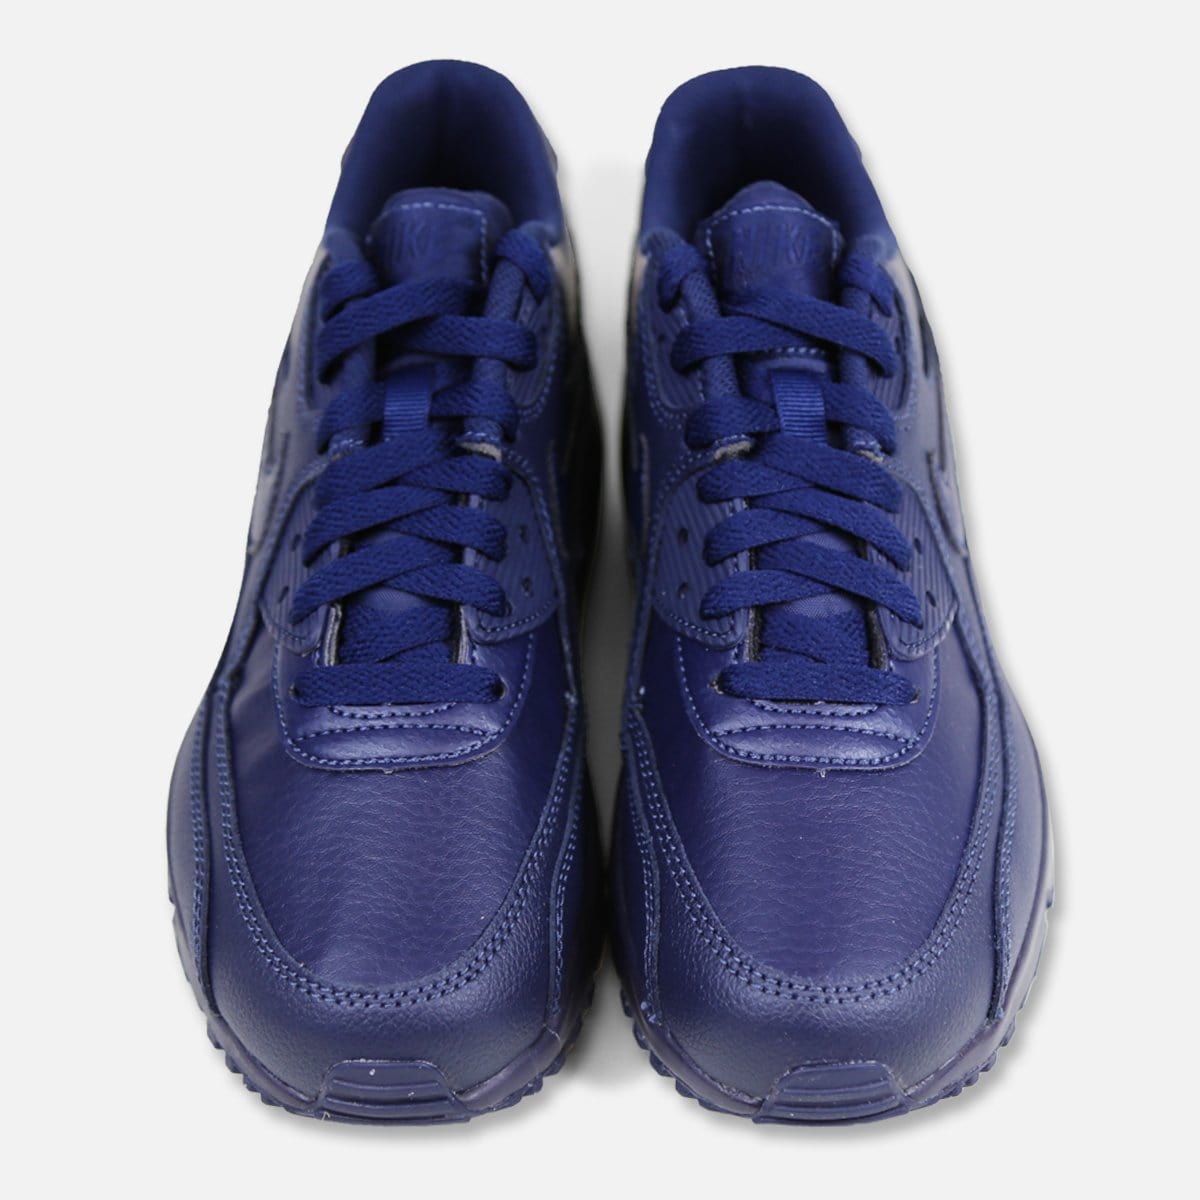 RUVilla.com is where to buy the Nike Air Max 90 Leather Grade-School (Obsidian)!